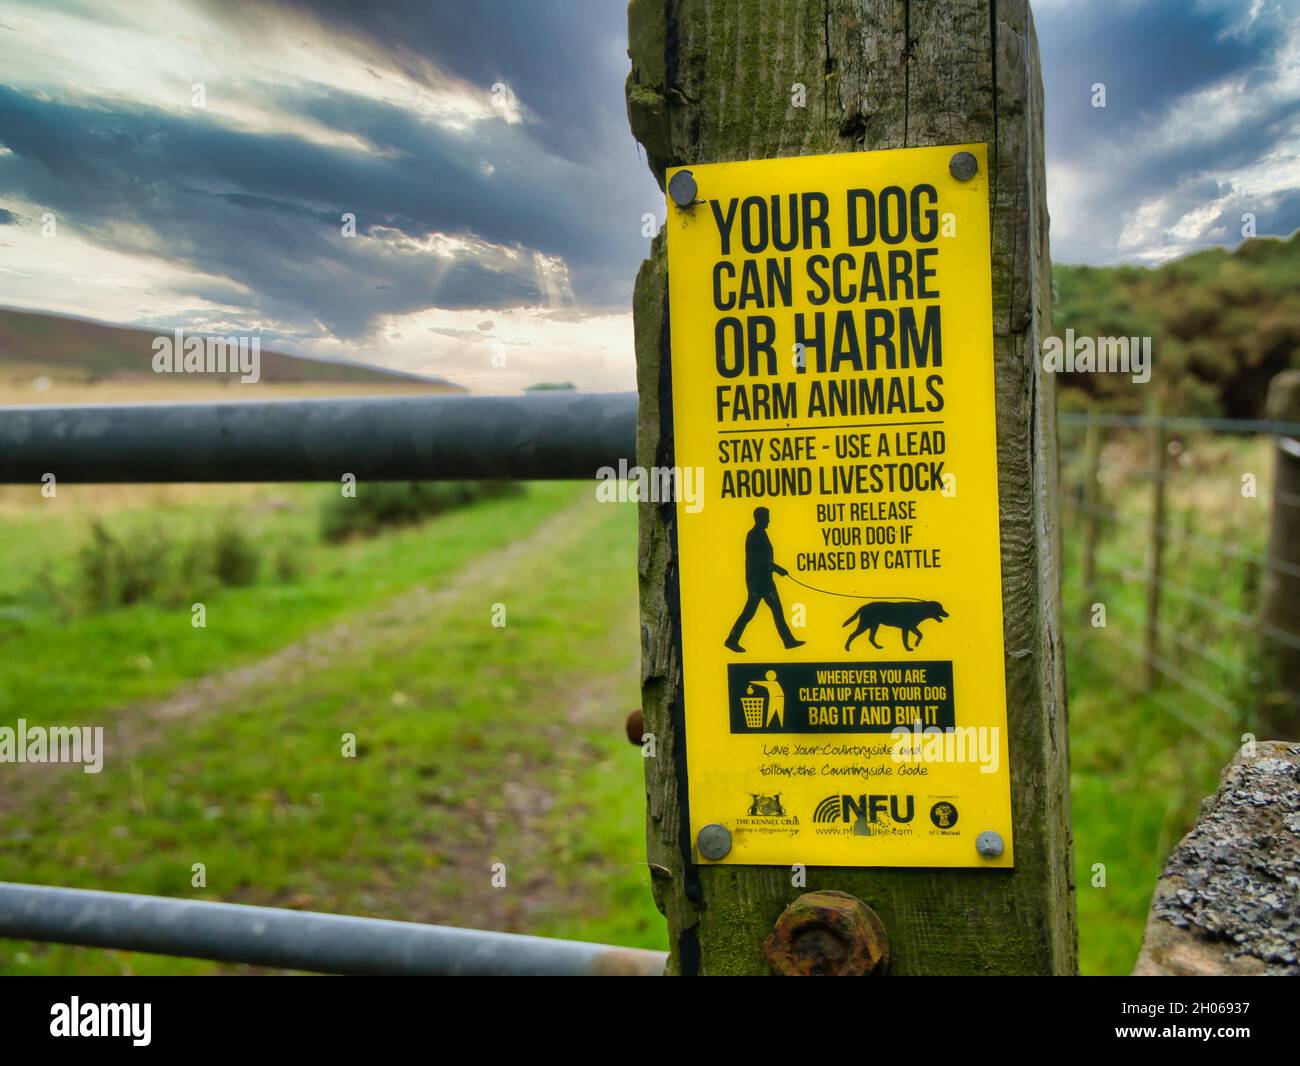 A yellow sign fixed to a wooden gate post at the entrance to a field warns that dogs can scare or harm farm animals and that a lead should be used aro Stock Photo